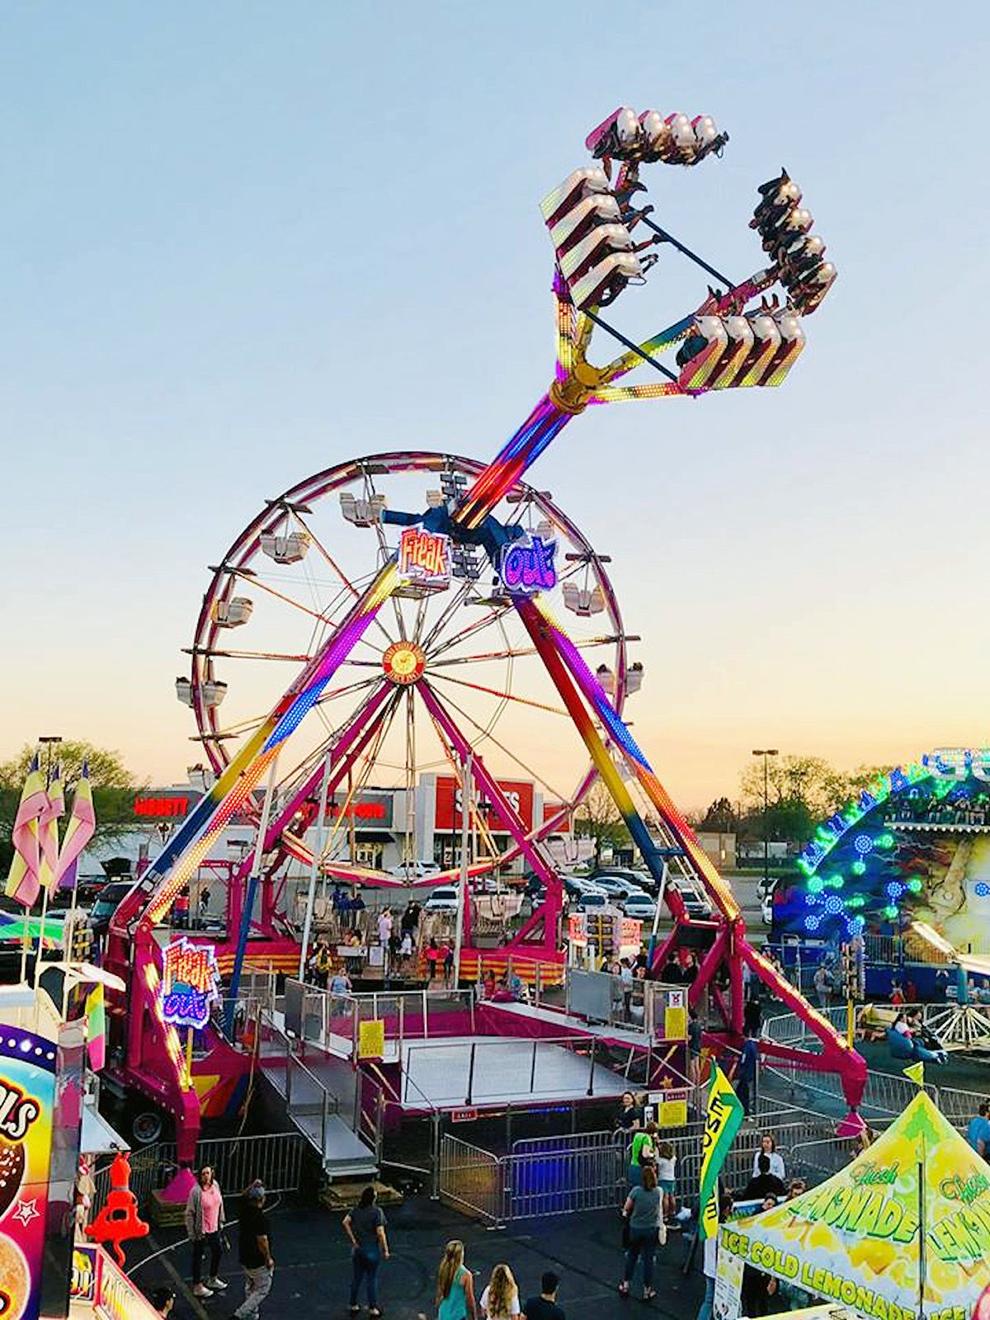 Evans United Show Carnival coming to mall for spring break Local